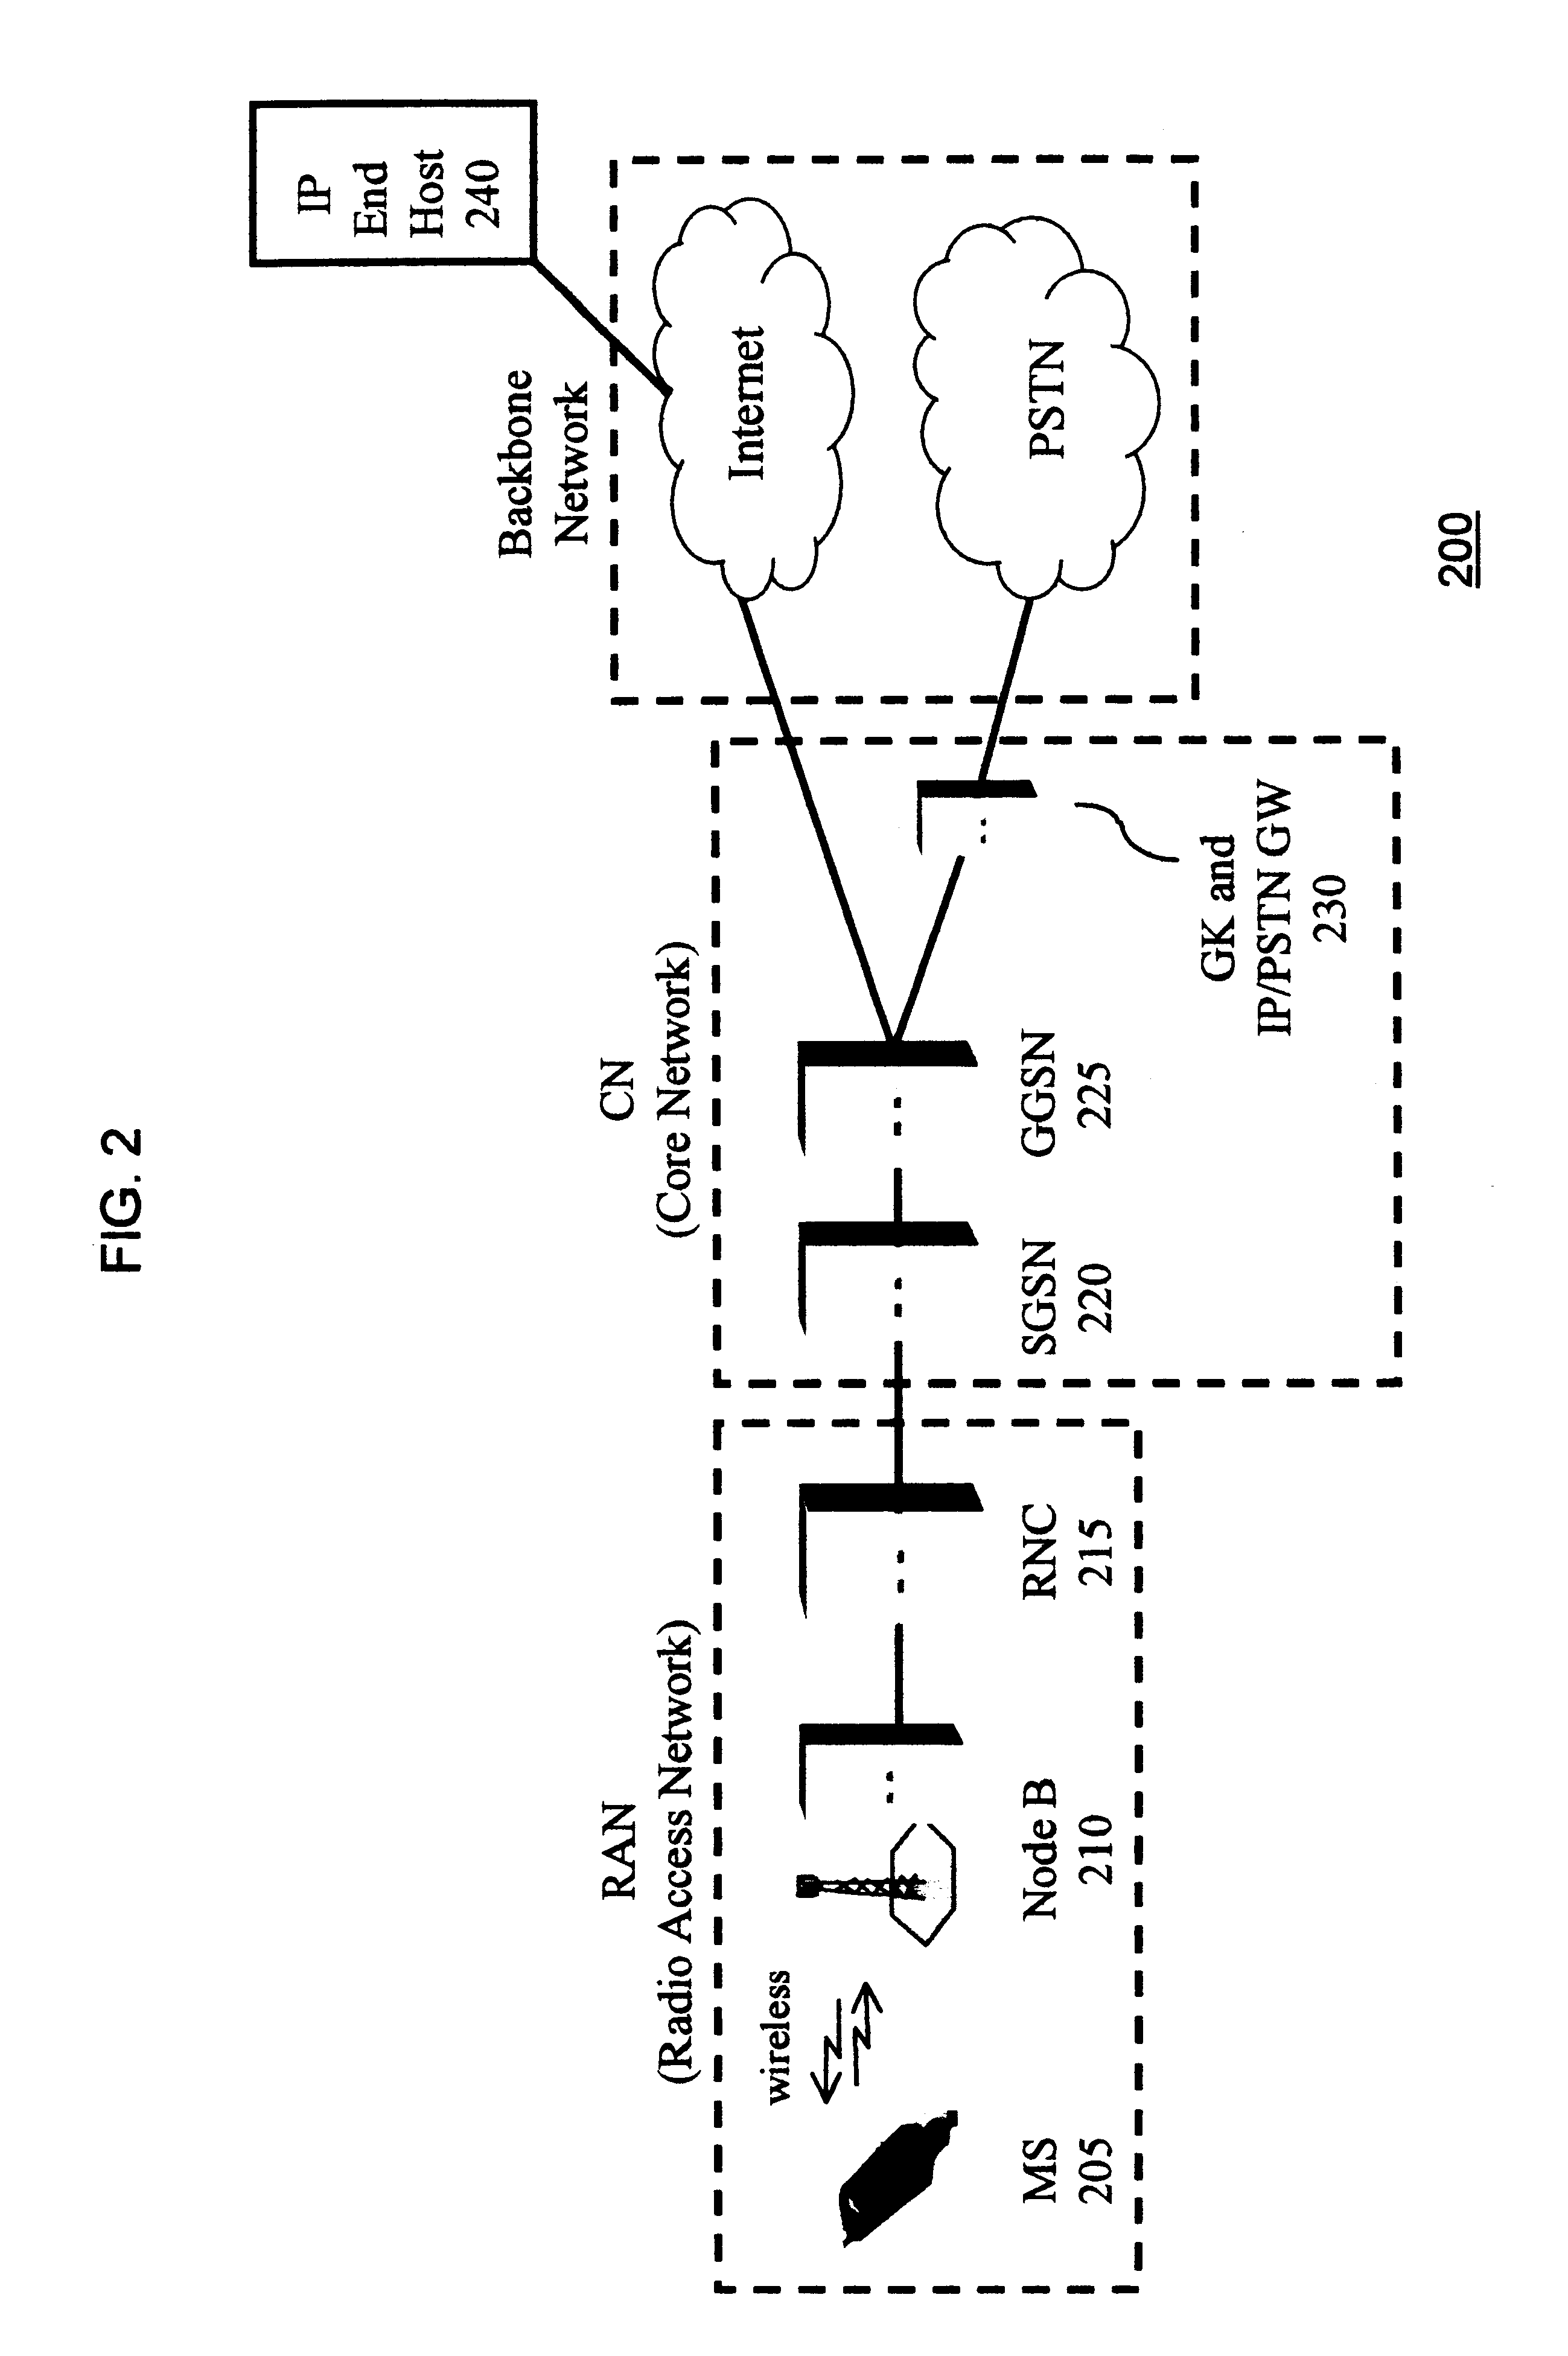 Header compression for general packet radio service tunneling protocol (GTP)-encapsulated packets